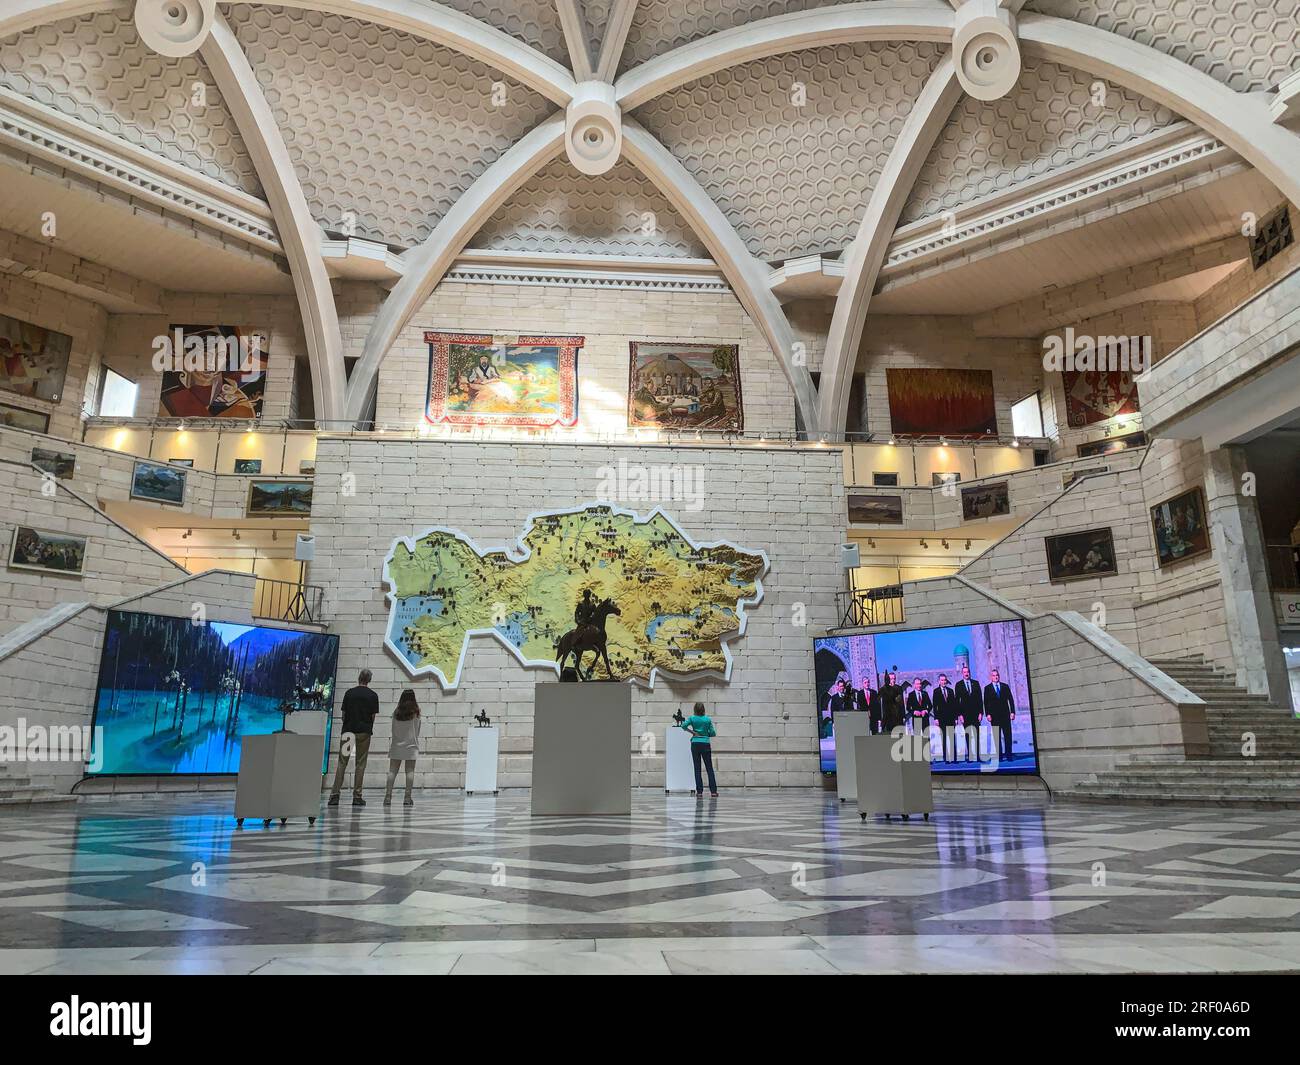 Kazakhstan, Almaty. Central State Museum of Kazakhstan, with Map of Kazakhstan in Entry Lobby.. Stock Photo